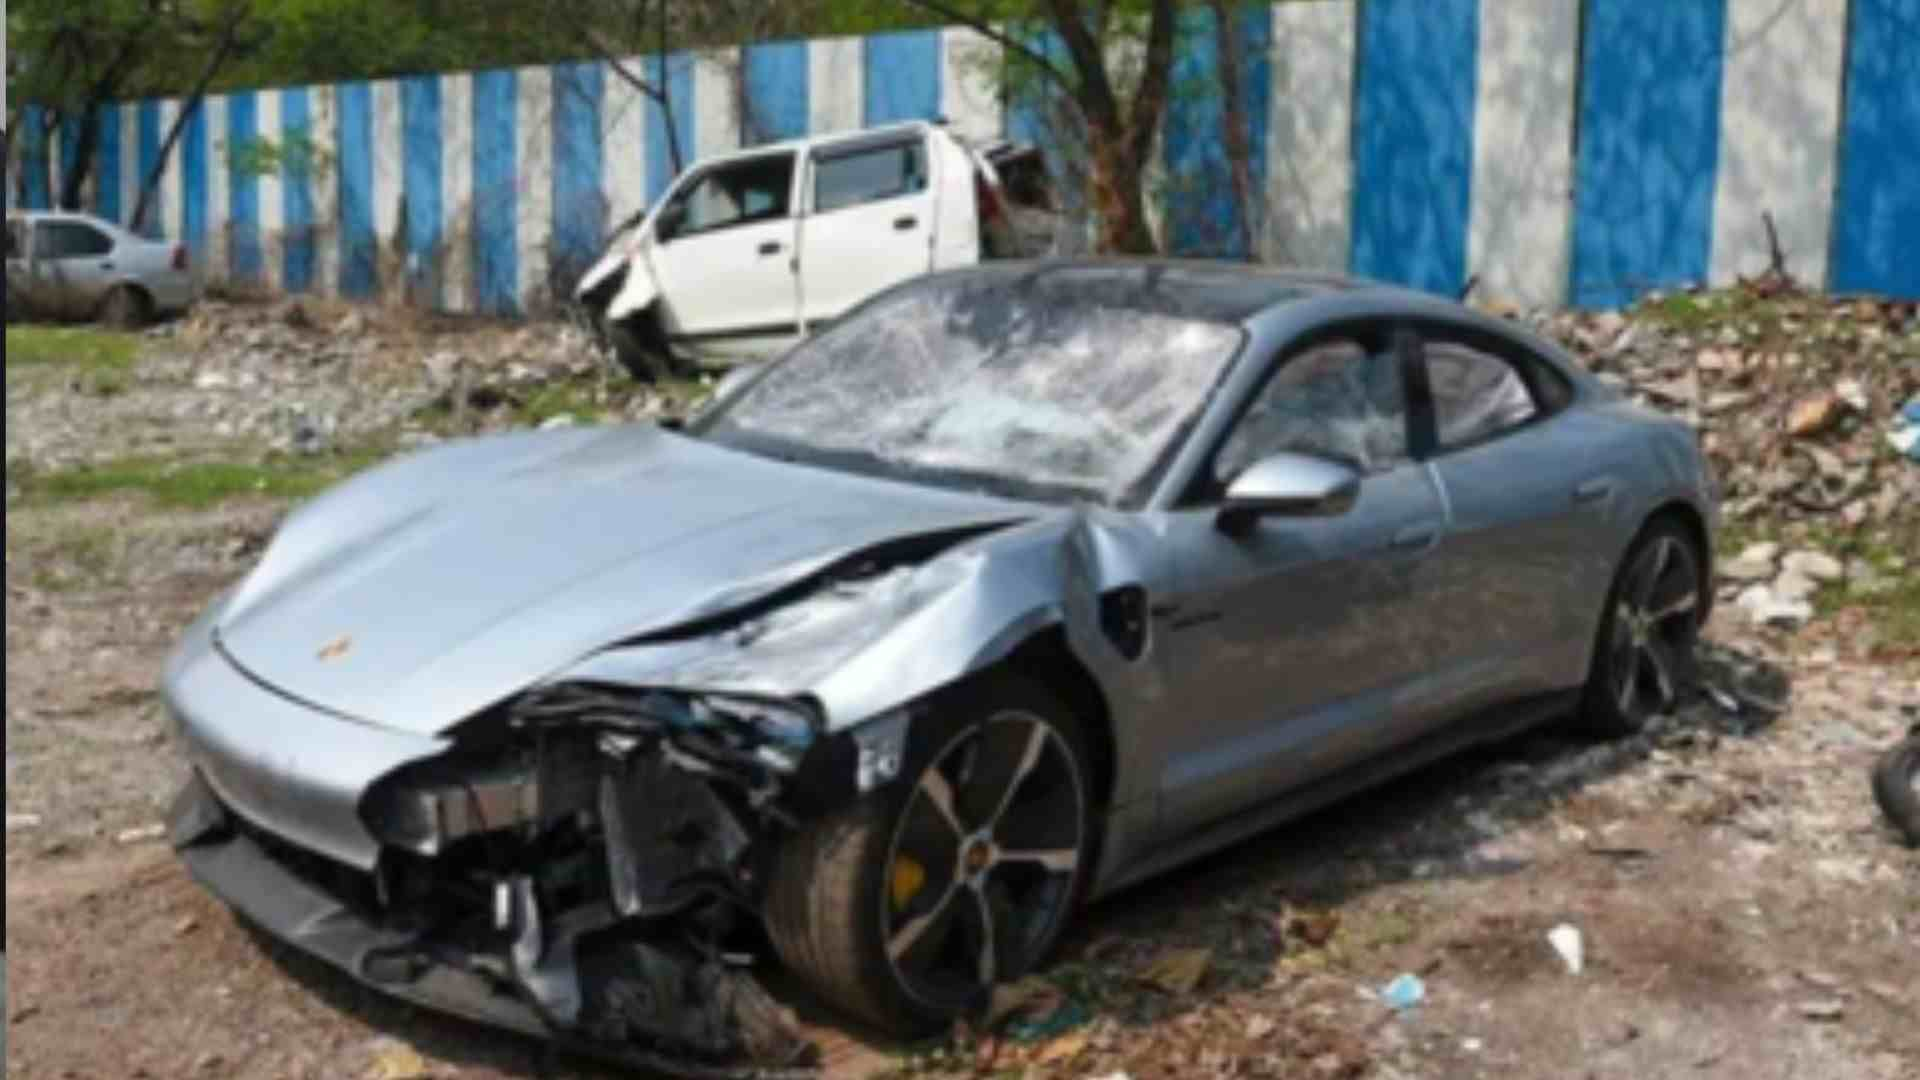 Pune Police Utilize Army Forensic Expert For Detailed Analysis Of Fatal Porsche Crash